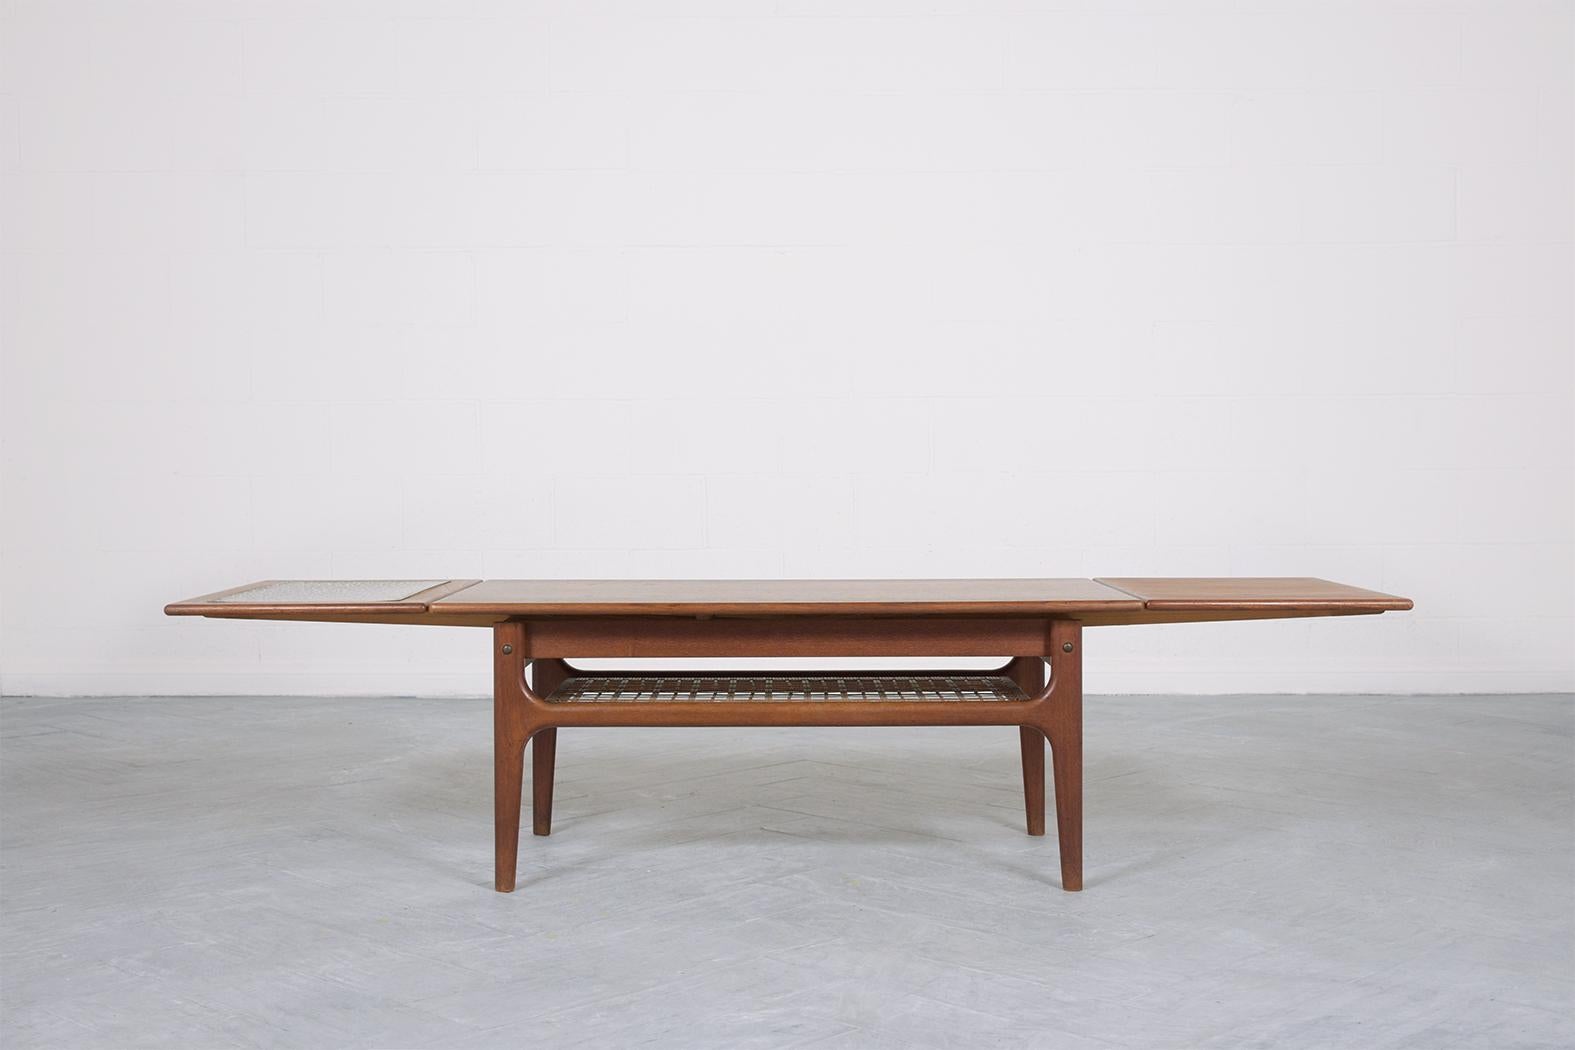 Caning 1960s Extendable Teak Coffee Table: Mid-Century Modern Design For Sale